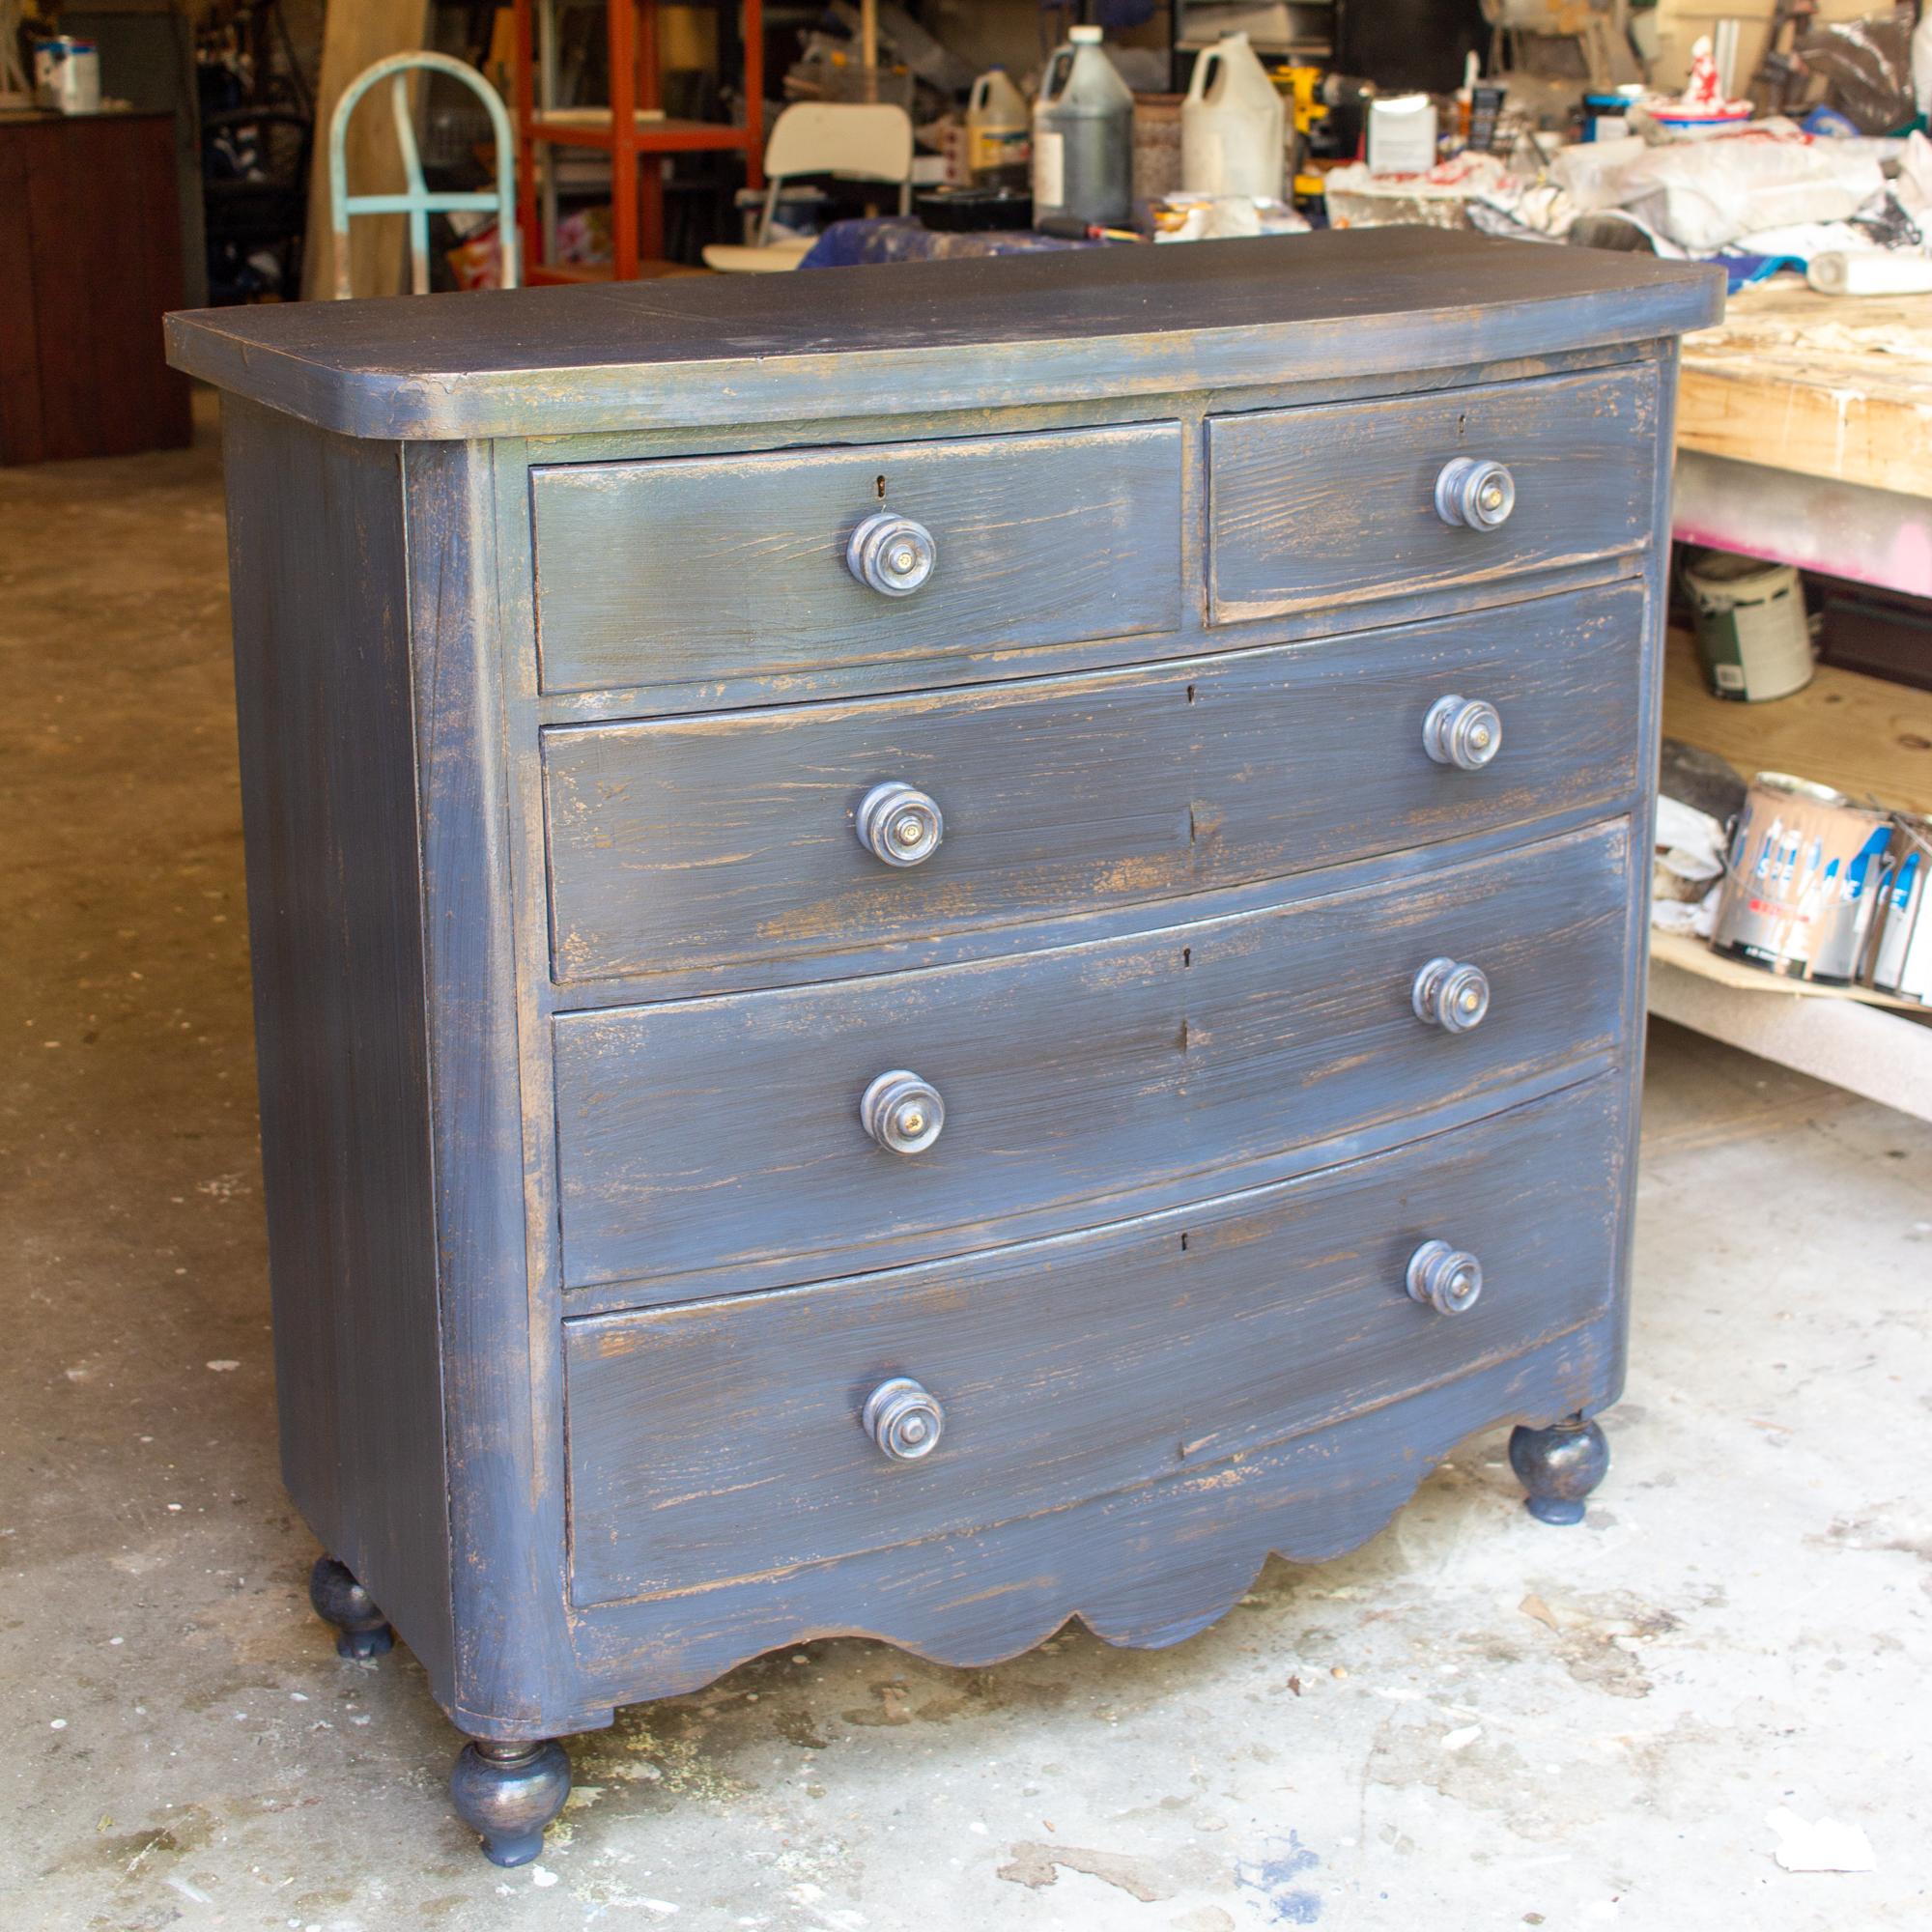 This is an antique English mahogany chest of drawers with five drawers, each featuring turned handles with mother of pearl inlay on the front of each pull. Decorative feet add an additional element to this otherwise simple, curved-front dresser. The